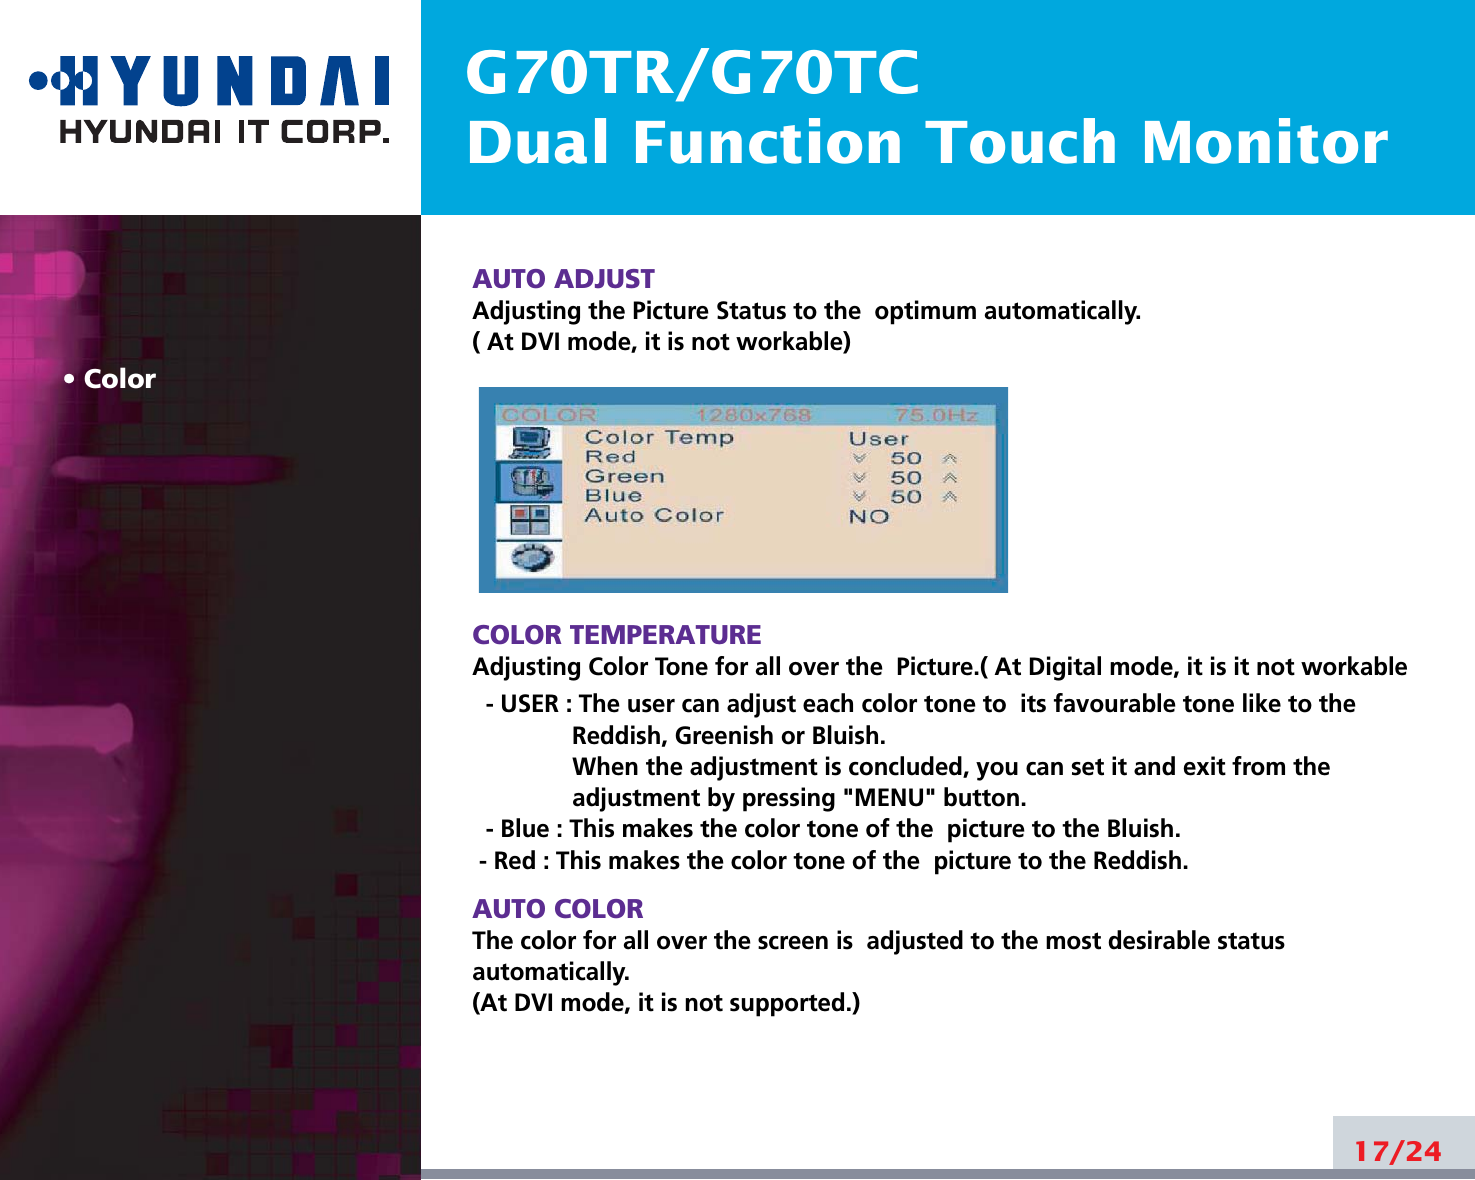 G70TR/G70TCDual Function Touch MonitorColorAUTO ADJUSTAdjusting the Picture Status to the  optimum automatically. ( At DVI mode, it is not workable)COLOR TEMPERATUREAdjusting Color Tone for all over the  Picture.( At Digital mode, it is it not workable- USER : The user can adjust each color tone to  its favourable tone like to theReddish, Greenish or Bluish.When the adjustment is concluded, you can set it and exit from theadjustment by pressing &quot;MENU&quot; button.- Blue : This makes the color tone of the  picture to the Bluish.- Red : This makes the color tone of the  picture to the Reddish.AUTO COLORThe color for all over the screen is  adjusted to the most desirable statusautomatically.(At DVI mode, it is not supported.)17/24